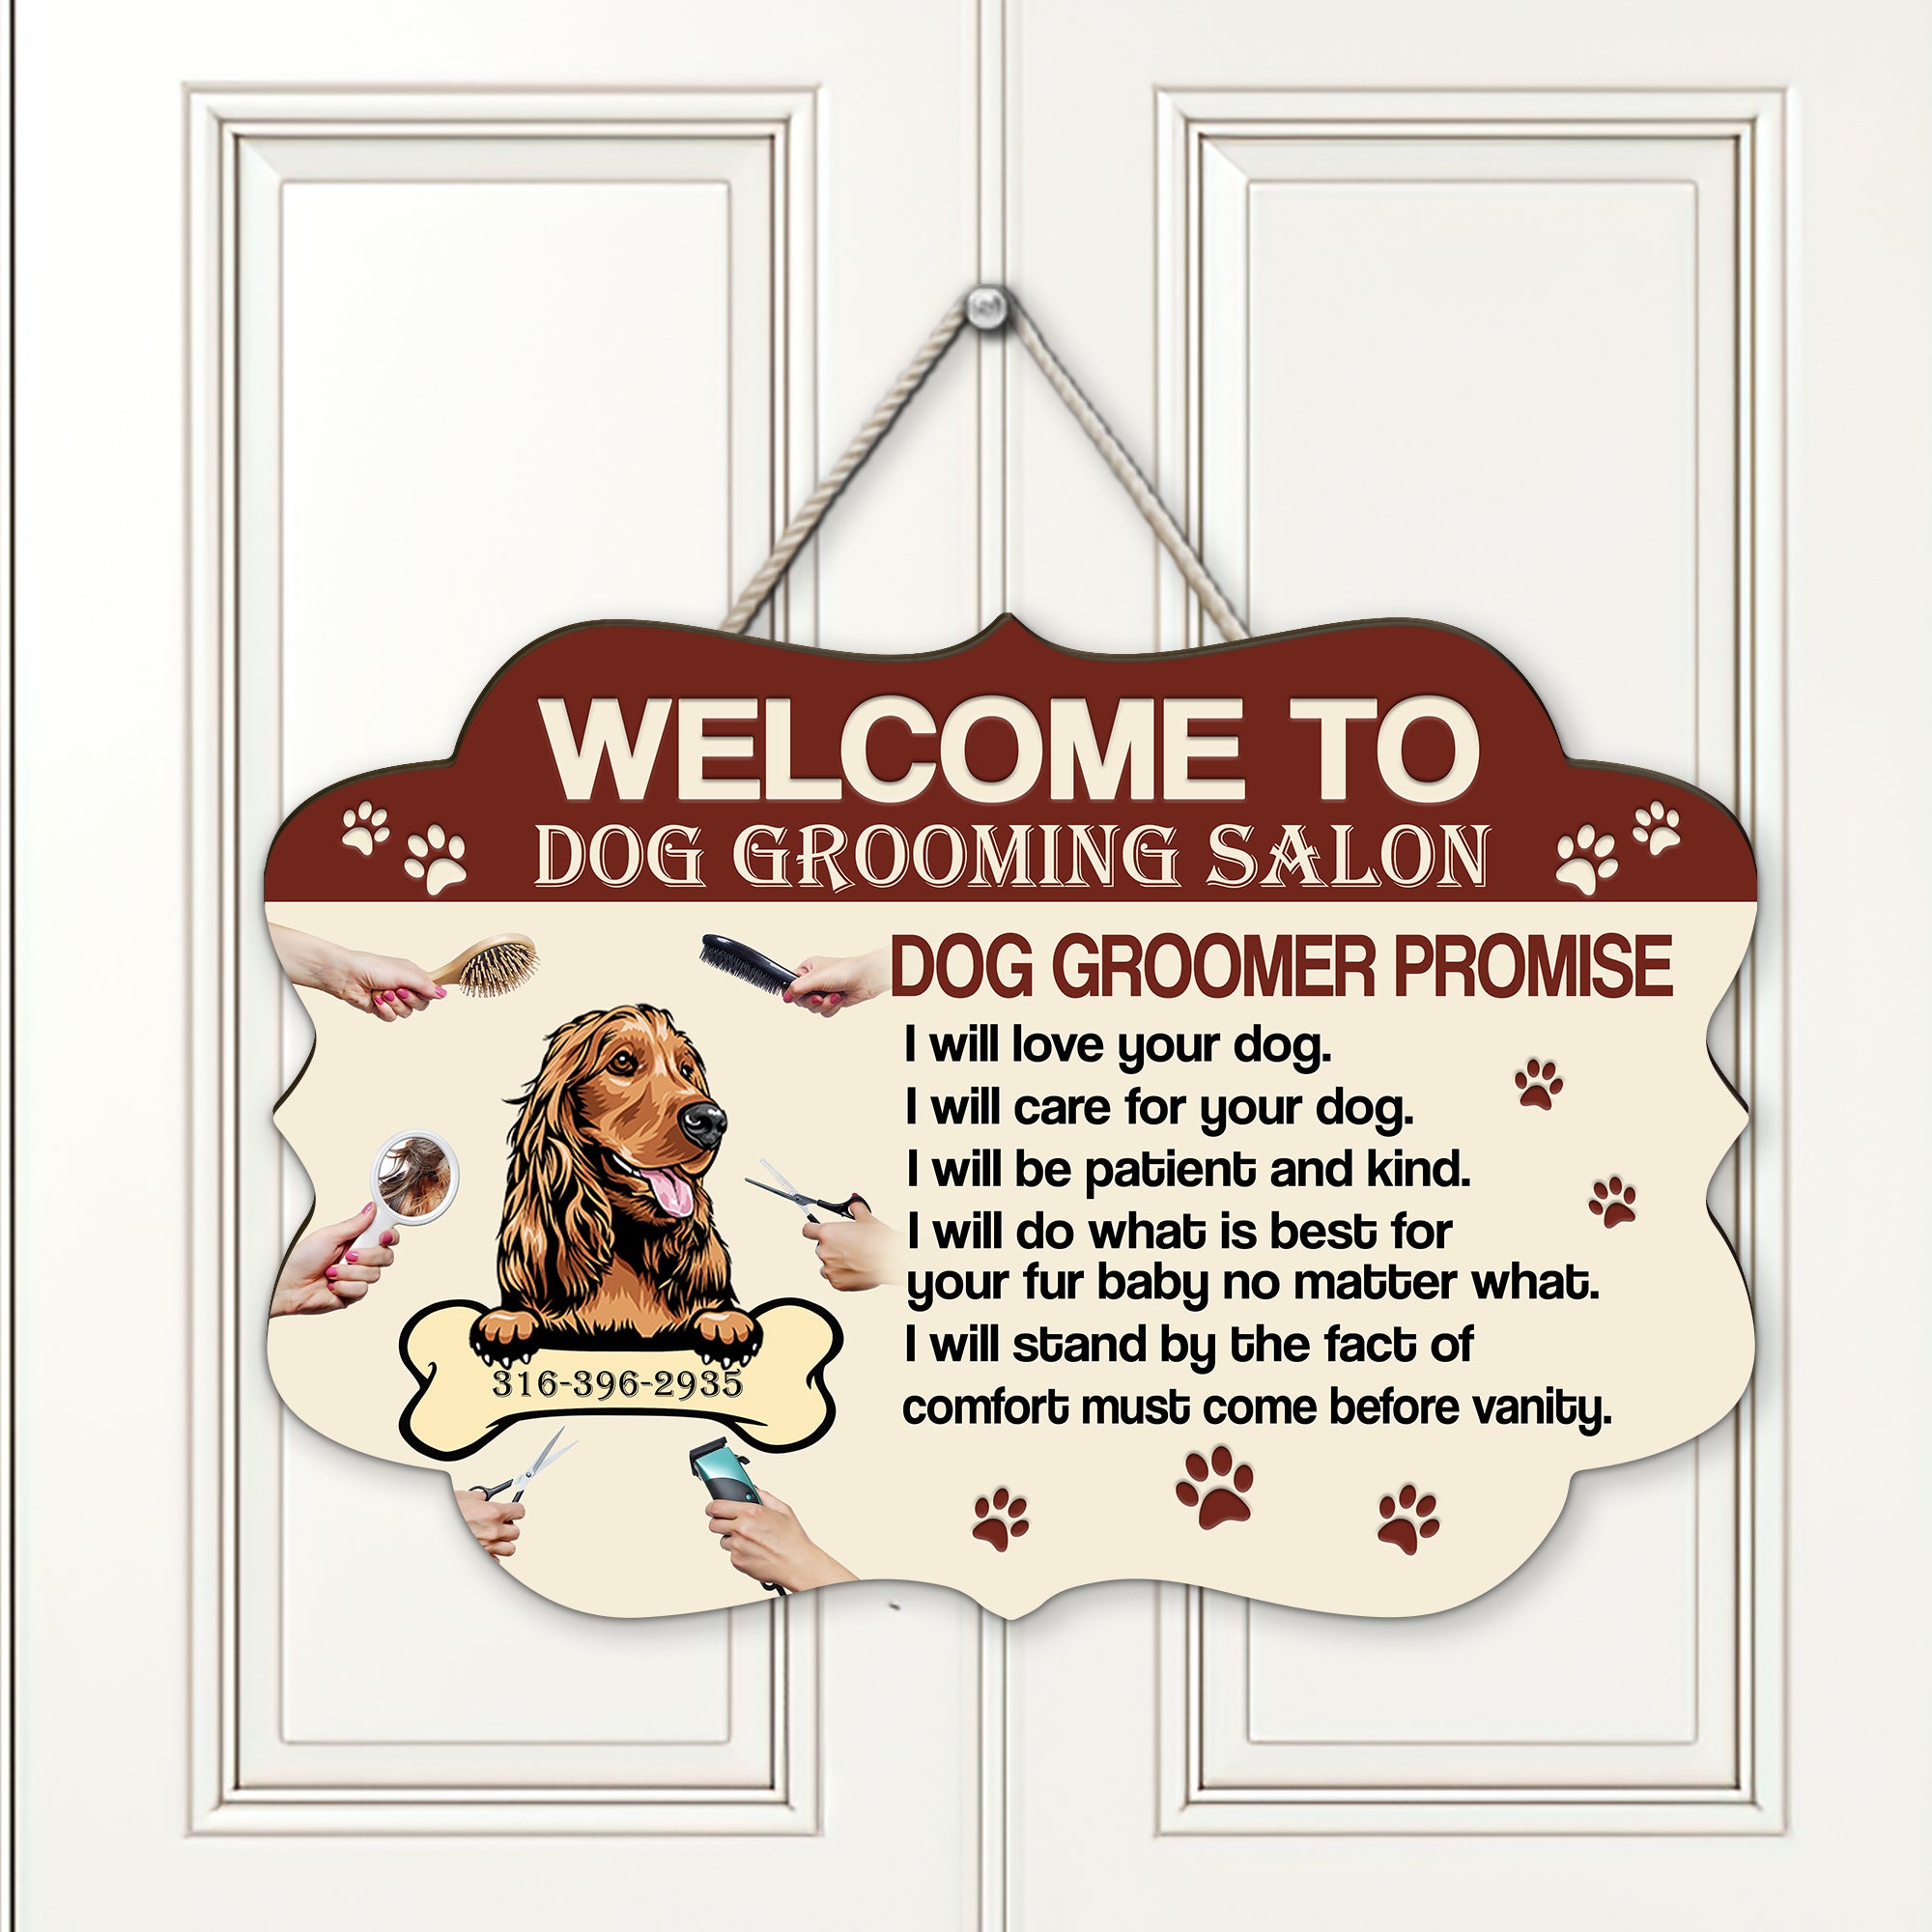 CUSTOM SHAPED WOODEN SIGN – WELCOME TO DOG GROOMING SALON WOODEN SIGN